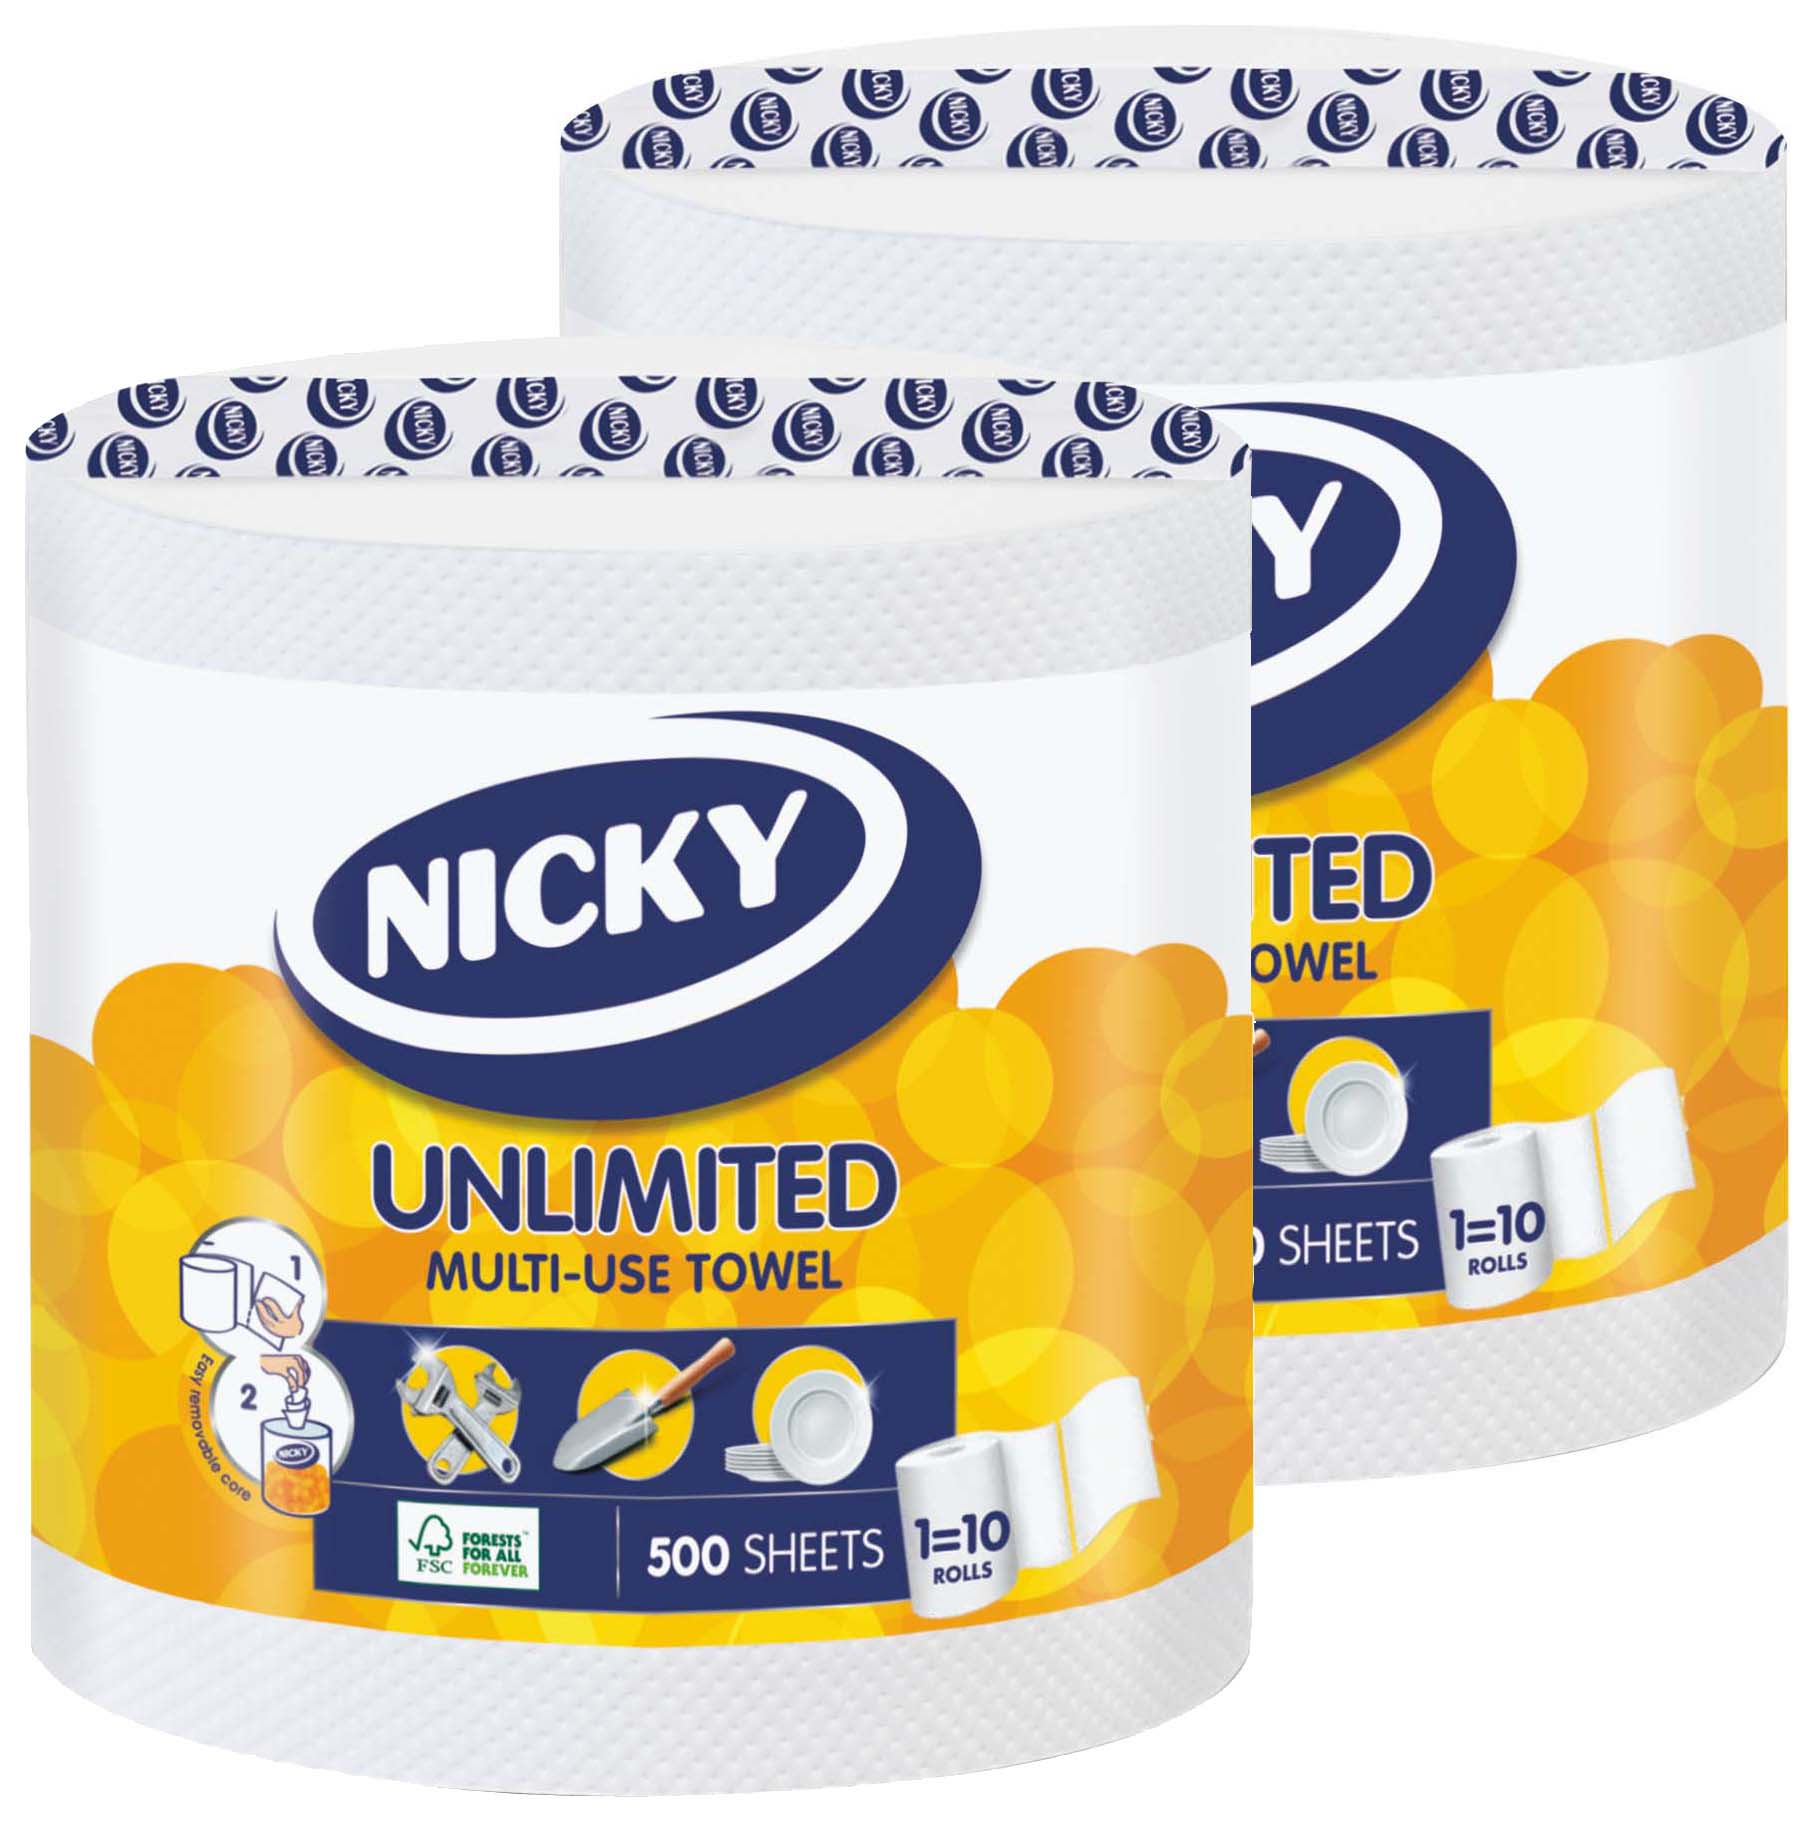 Nicky Unlimited 500 Sheets Multi-Use Towel - Pack